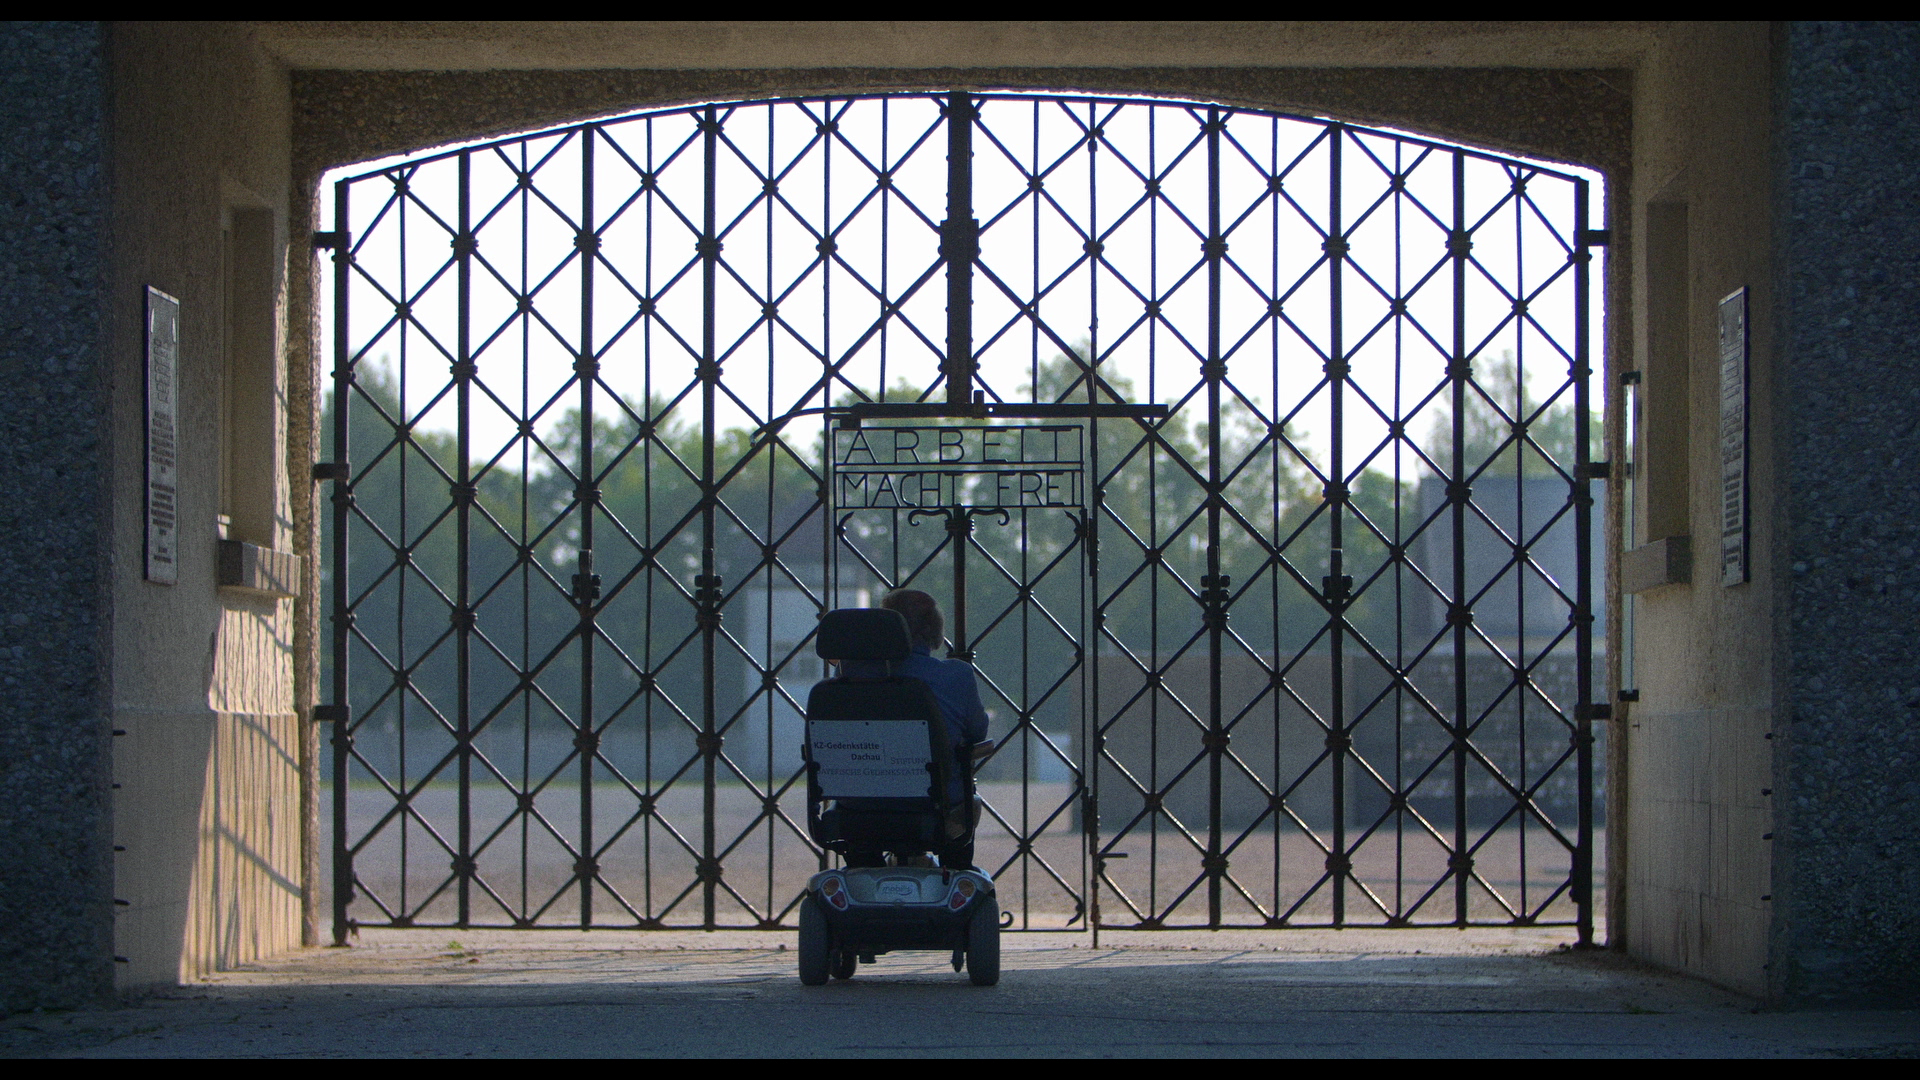 Person in a wheelchair in front of concentration camp gates